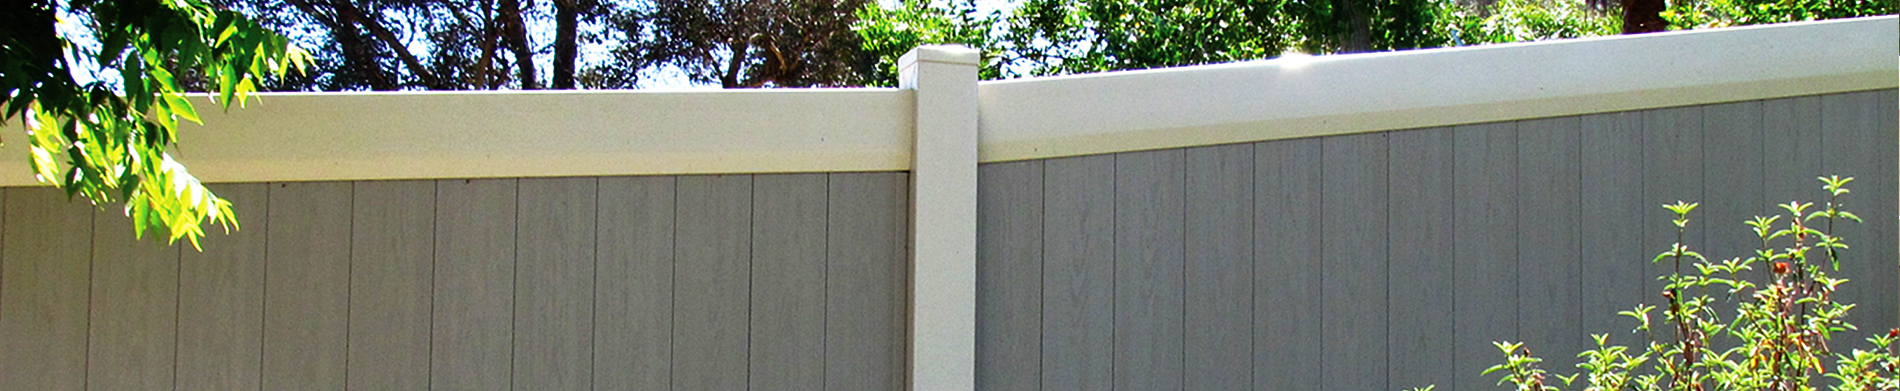 Are Vinyl Fence Panels Worth Your Money?